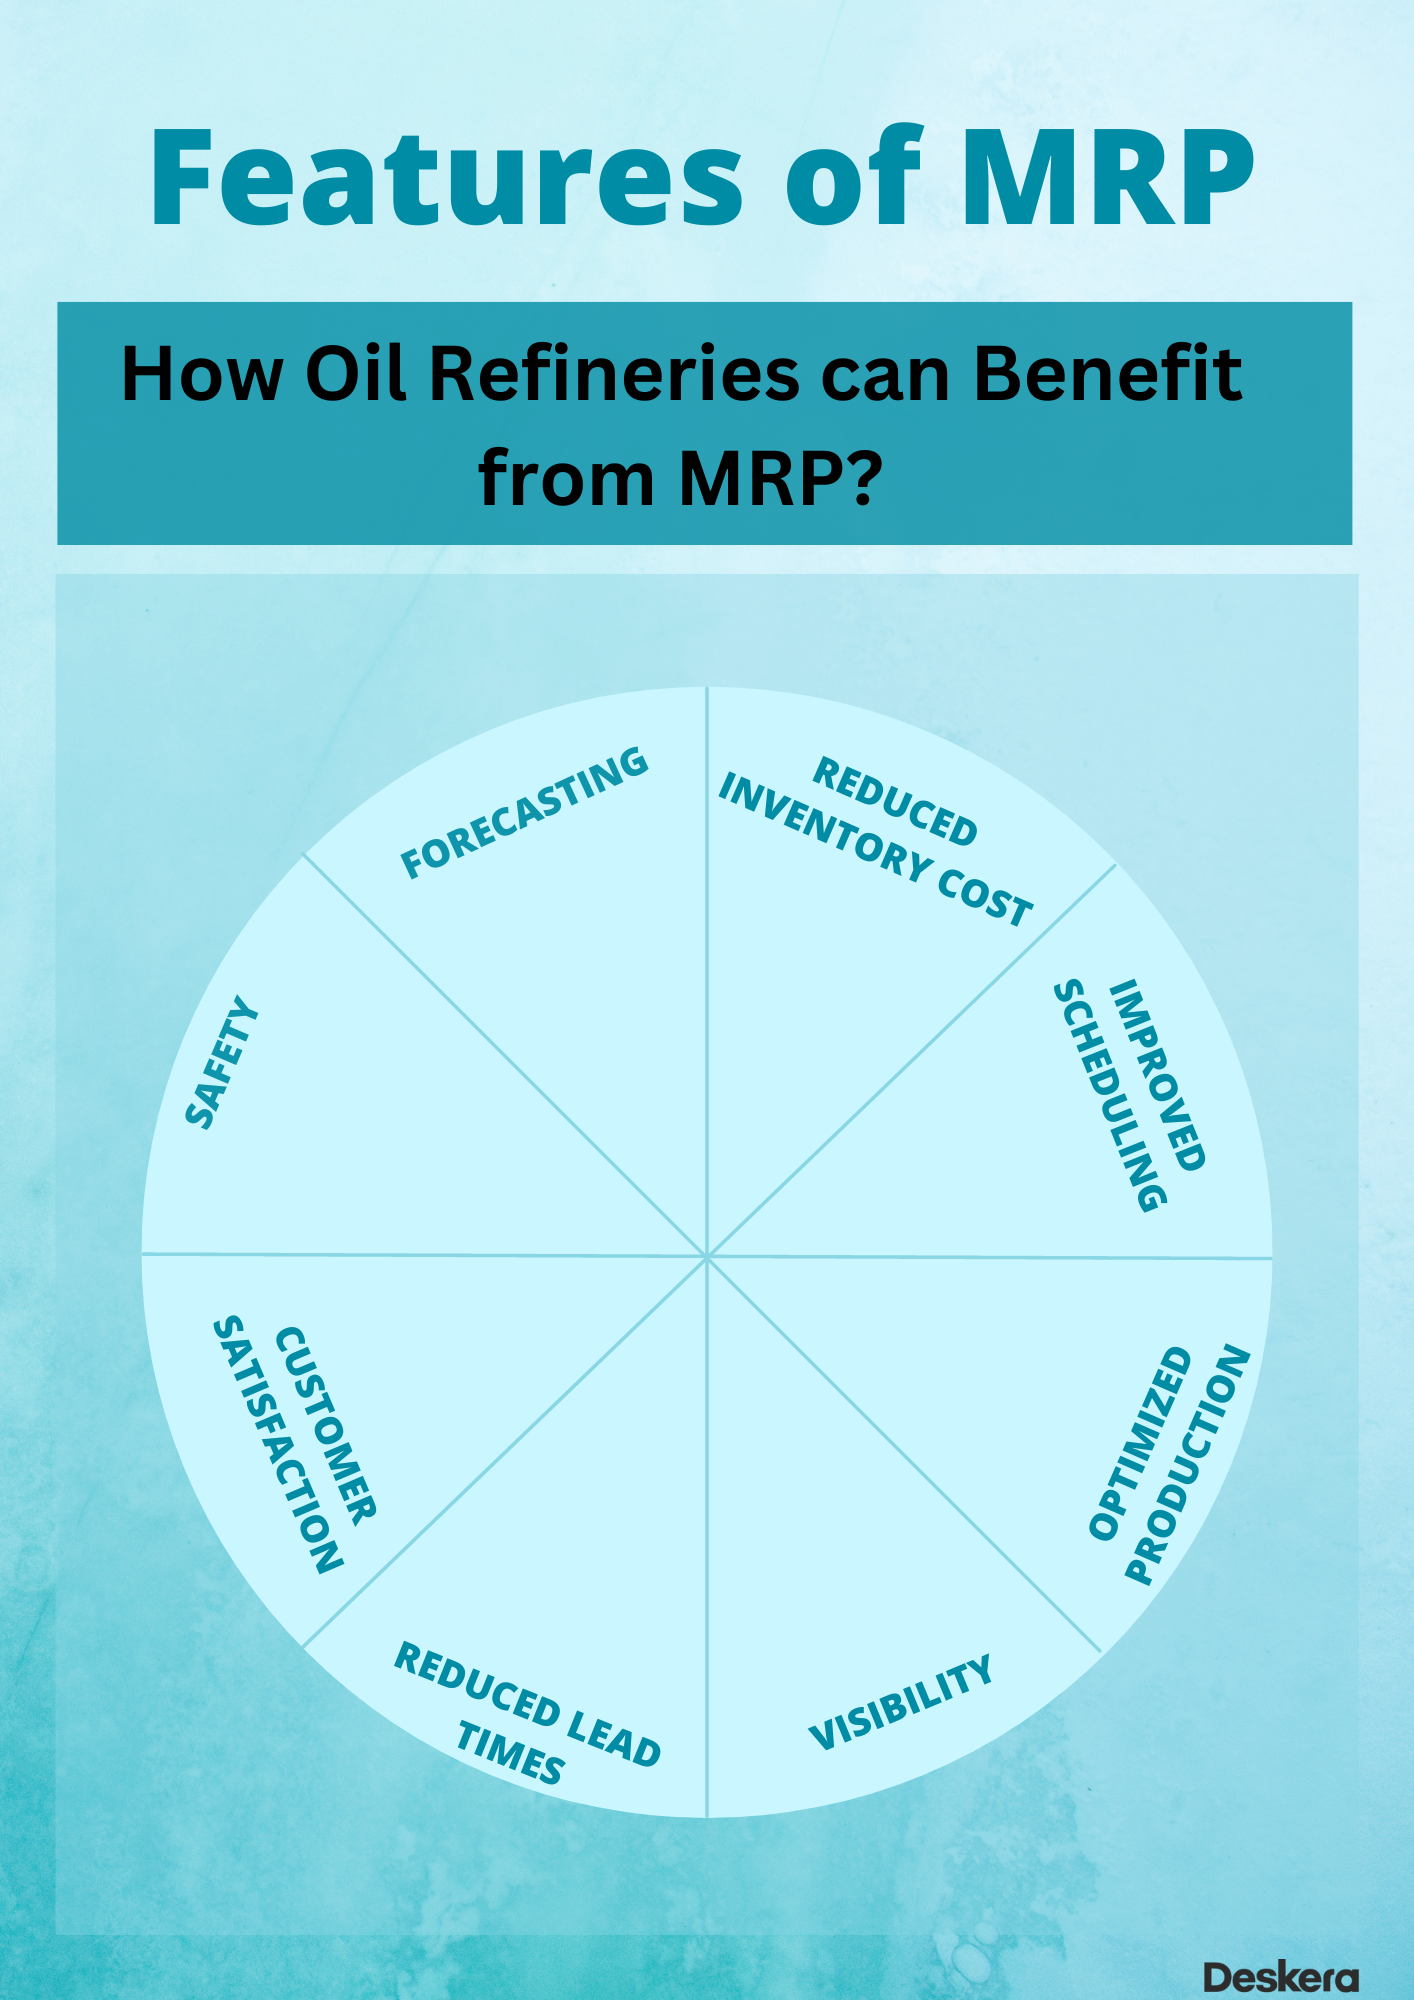 Features of MRP Helpful for Oil Refineries